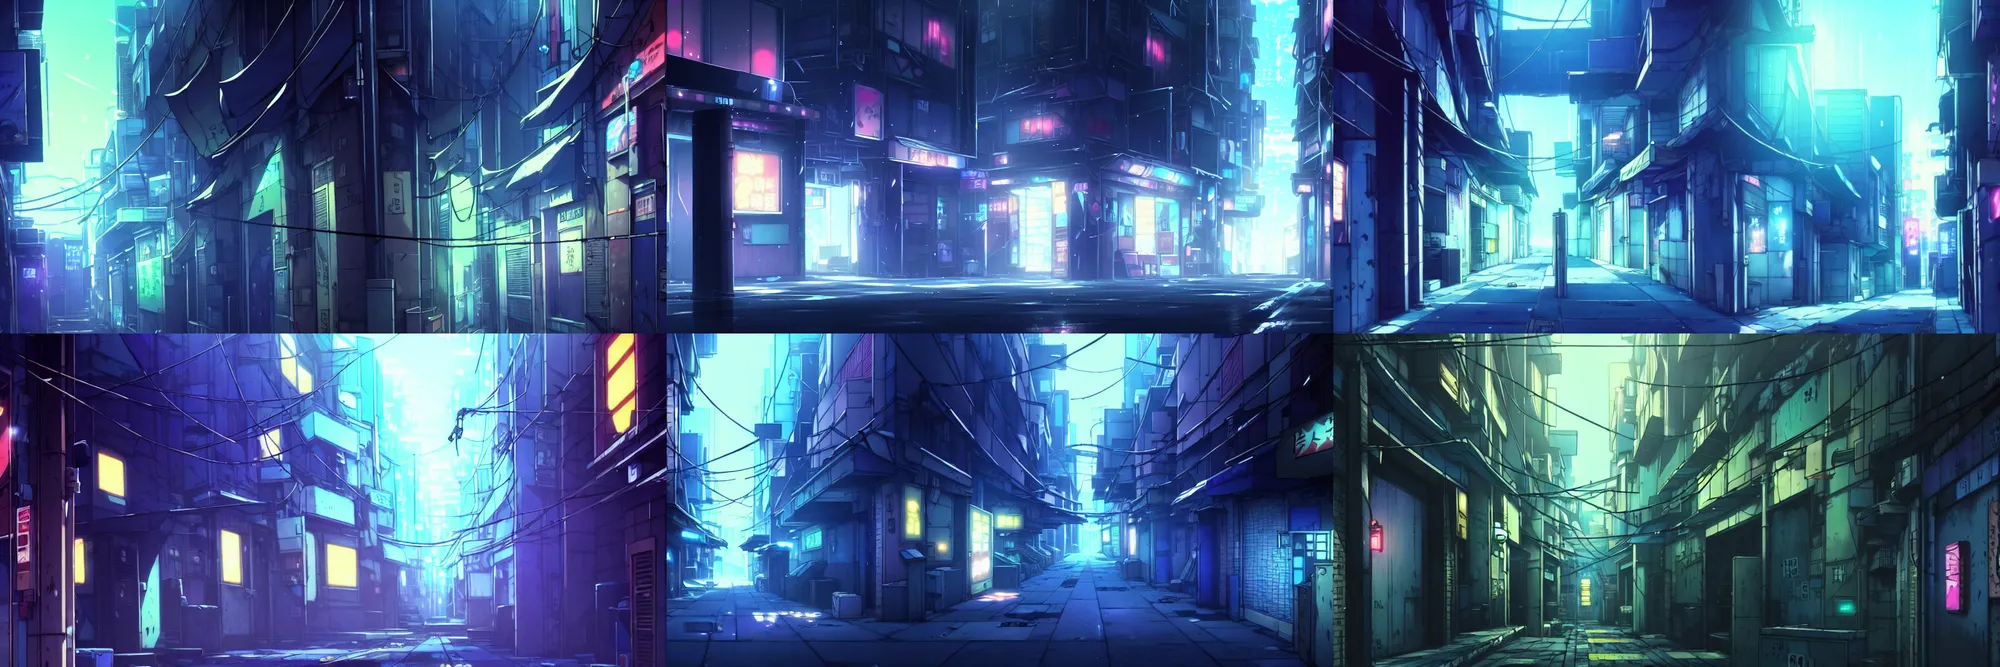 3,372 Anime Street Background Images, Stock Photos, 3D objects, & Vectors |  Shutterstock